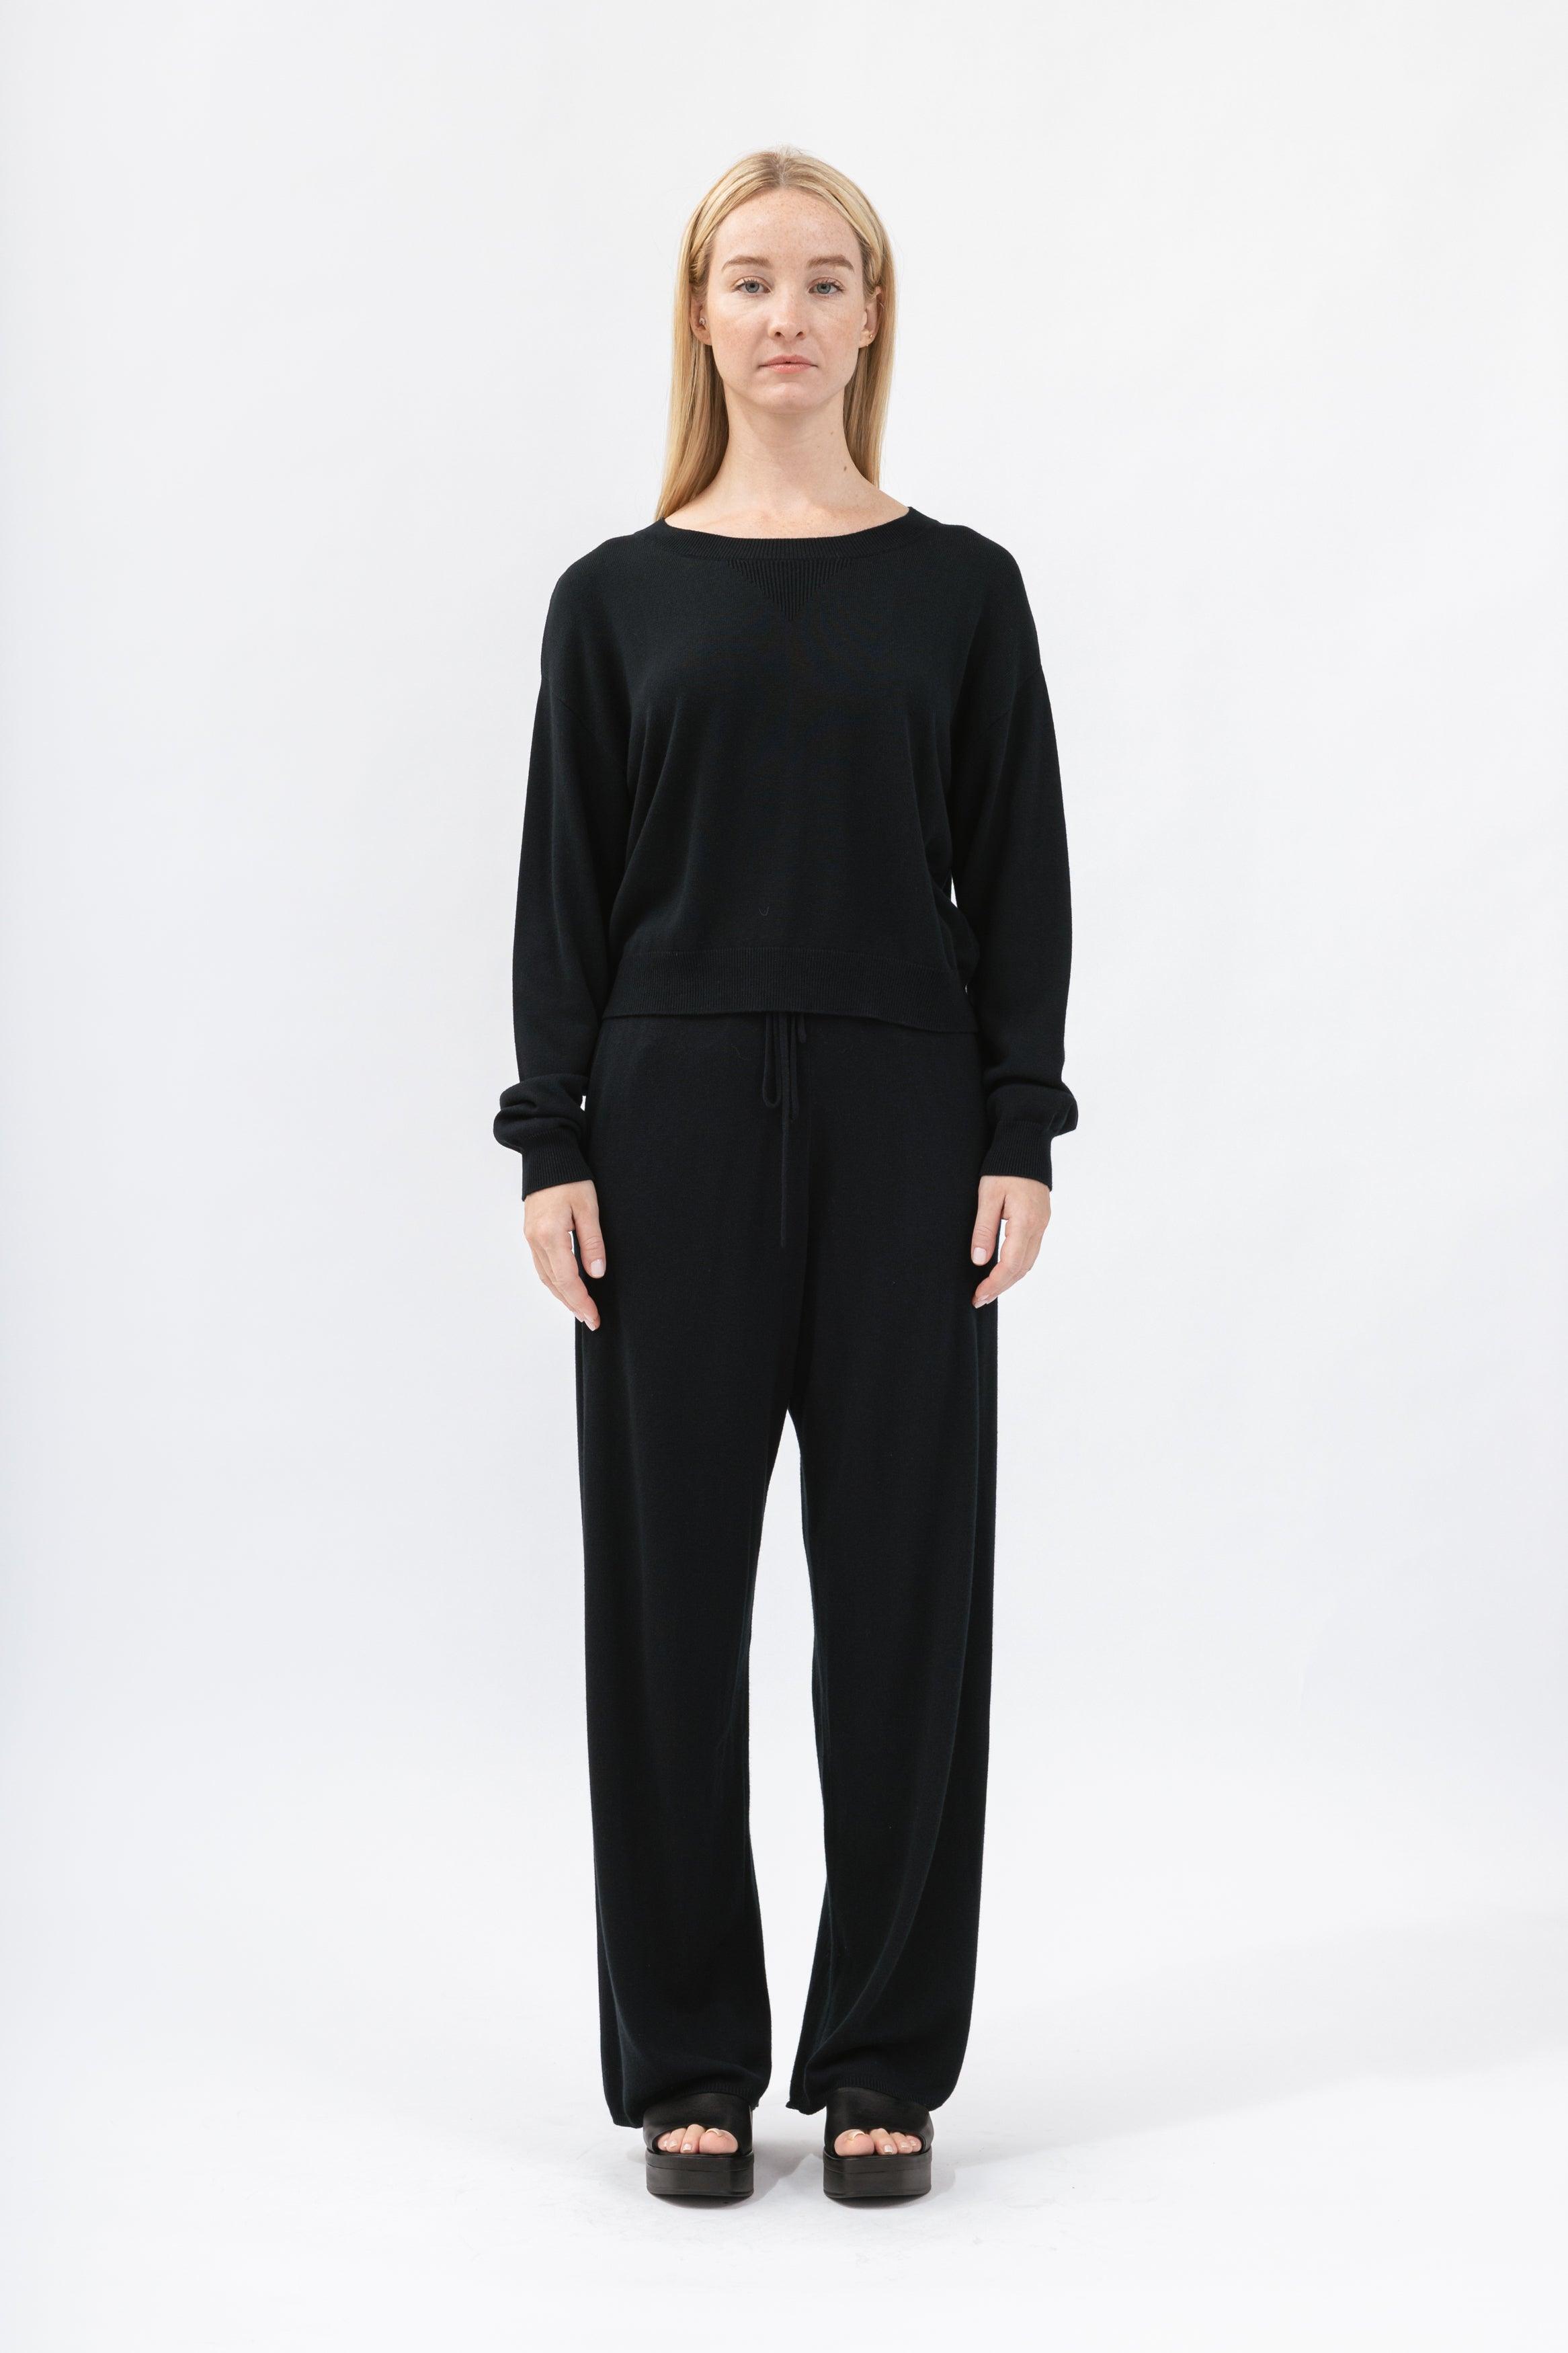 Women&#39;s Relax Straight Knit Pants - NOT LABELED